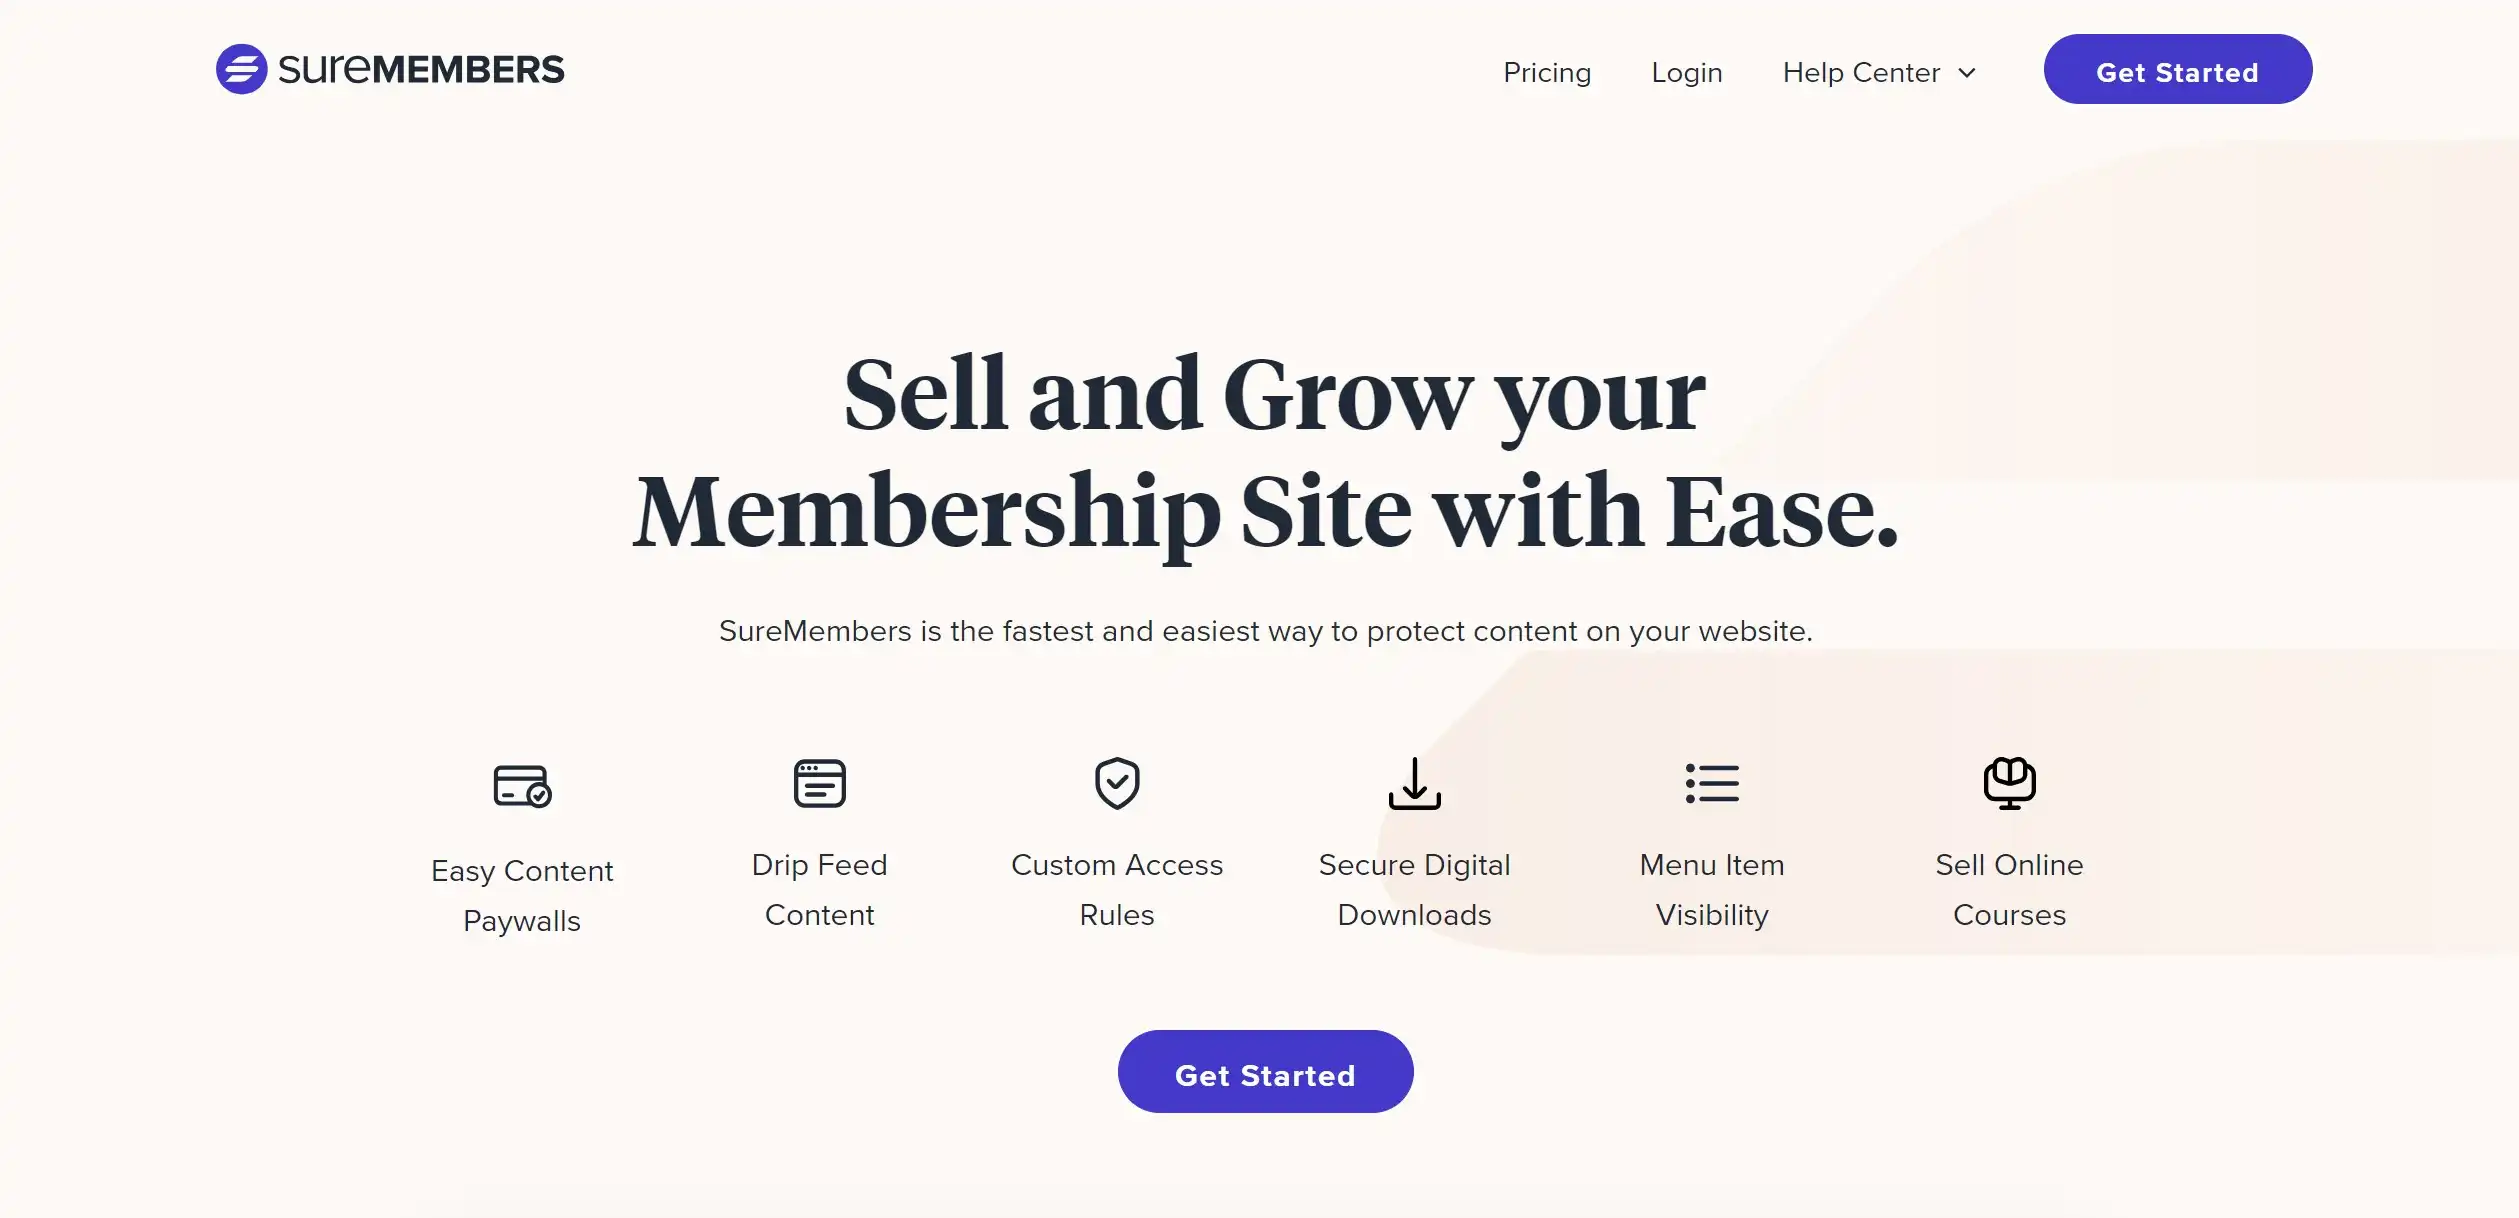 MemberSpace is one of the best membership website platforms to level up your membership game